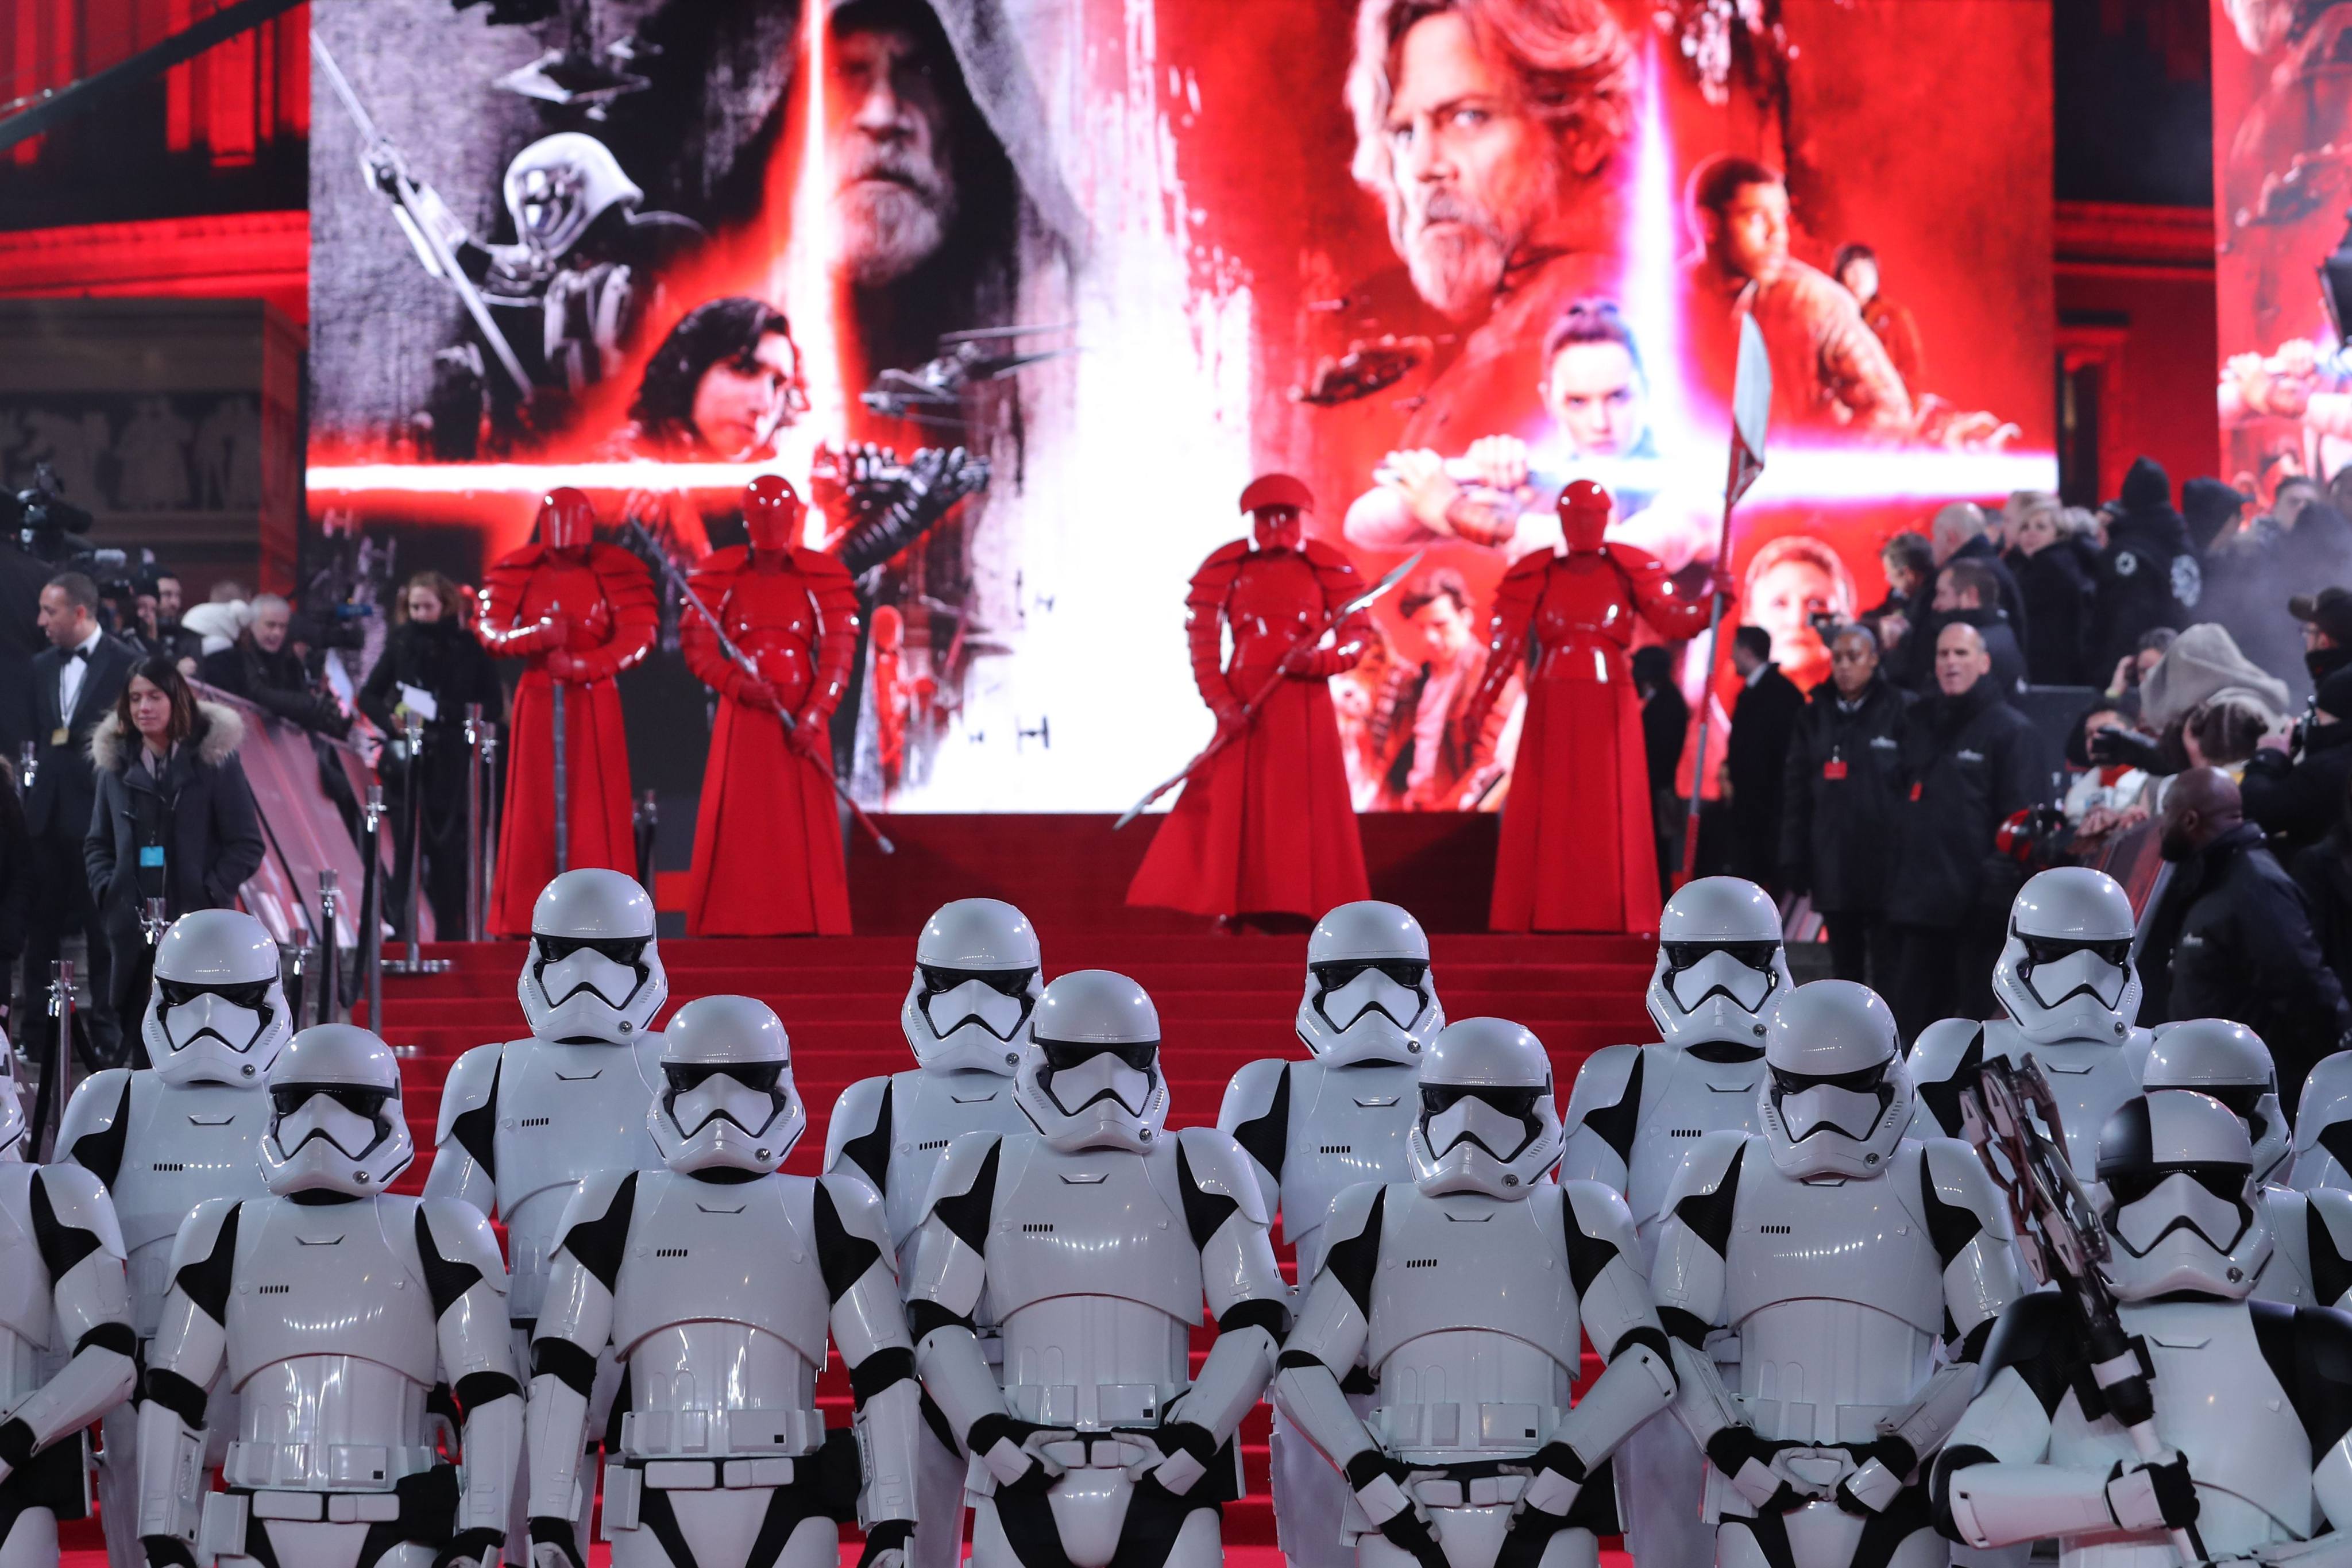 Stormtroopers and other guards pose on the red carpet for a premiere of ‘Star Wars: The Last Jedi’ in 2017. Star War films have been hugely successful, with Singapore’s Lucasfilm studio involved in production. File photo: AFP